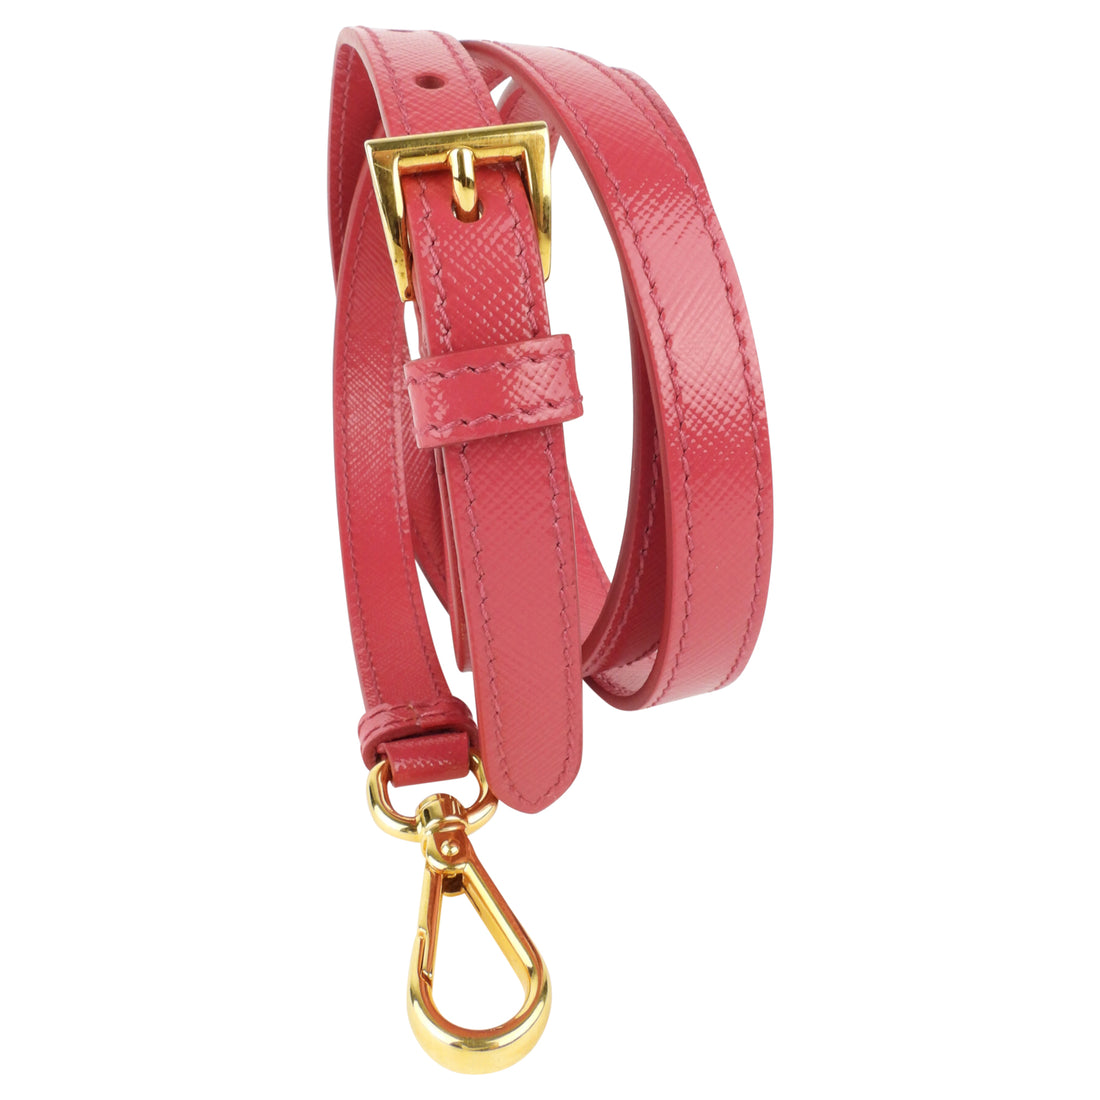 Prada Saffiano Leather And Striped Fabric Shoulder Strap in Pink